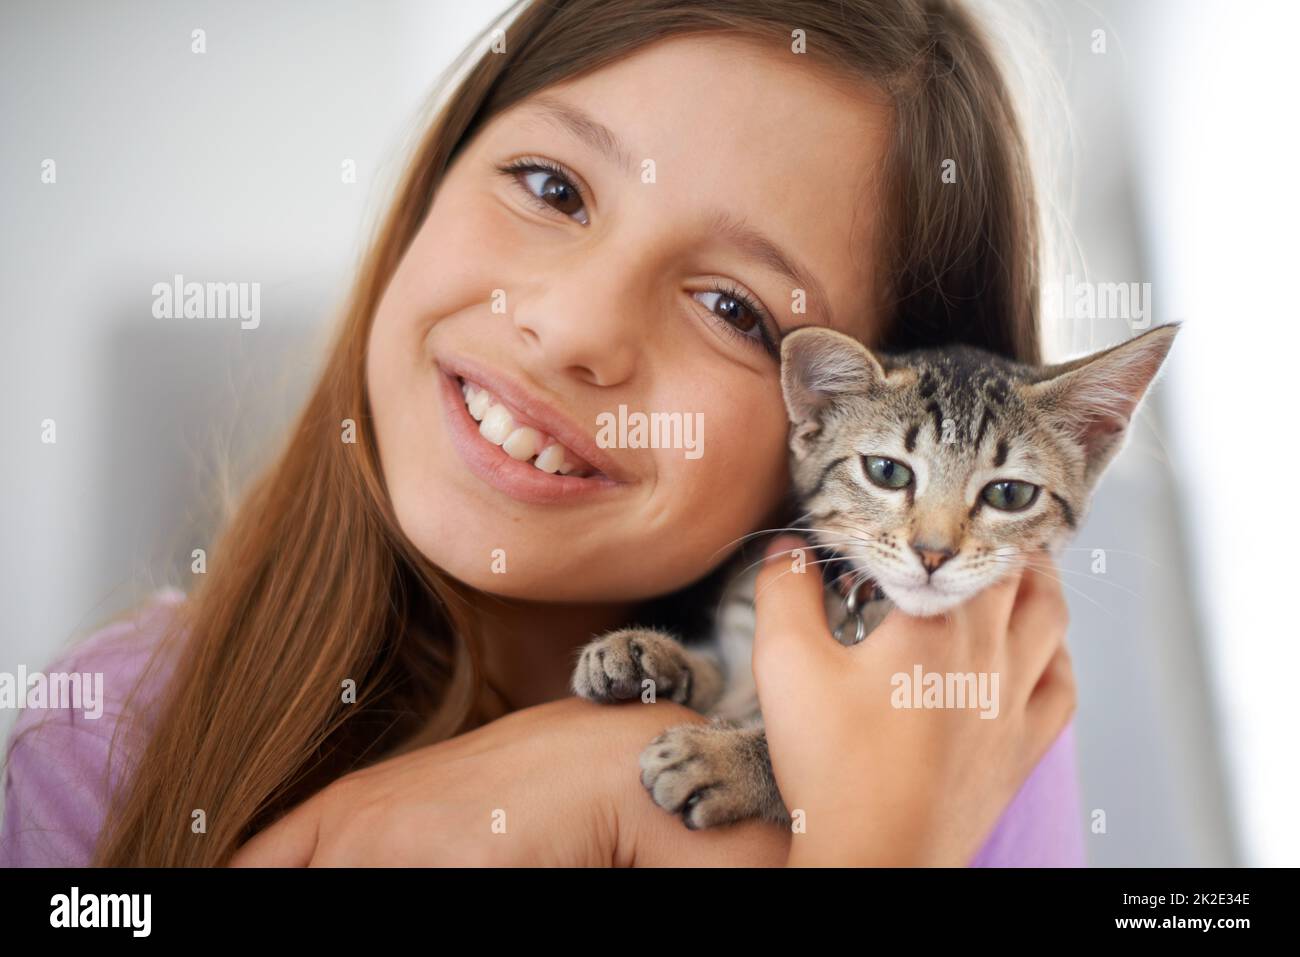 Can we keep him. A happy young girl holding a kitten affectionately. Stock Photo